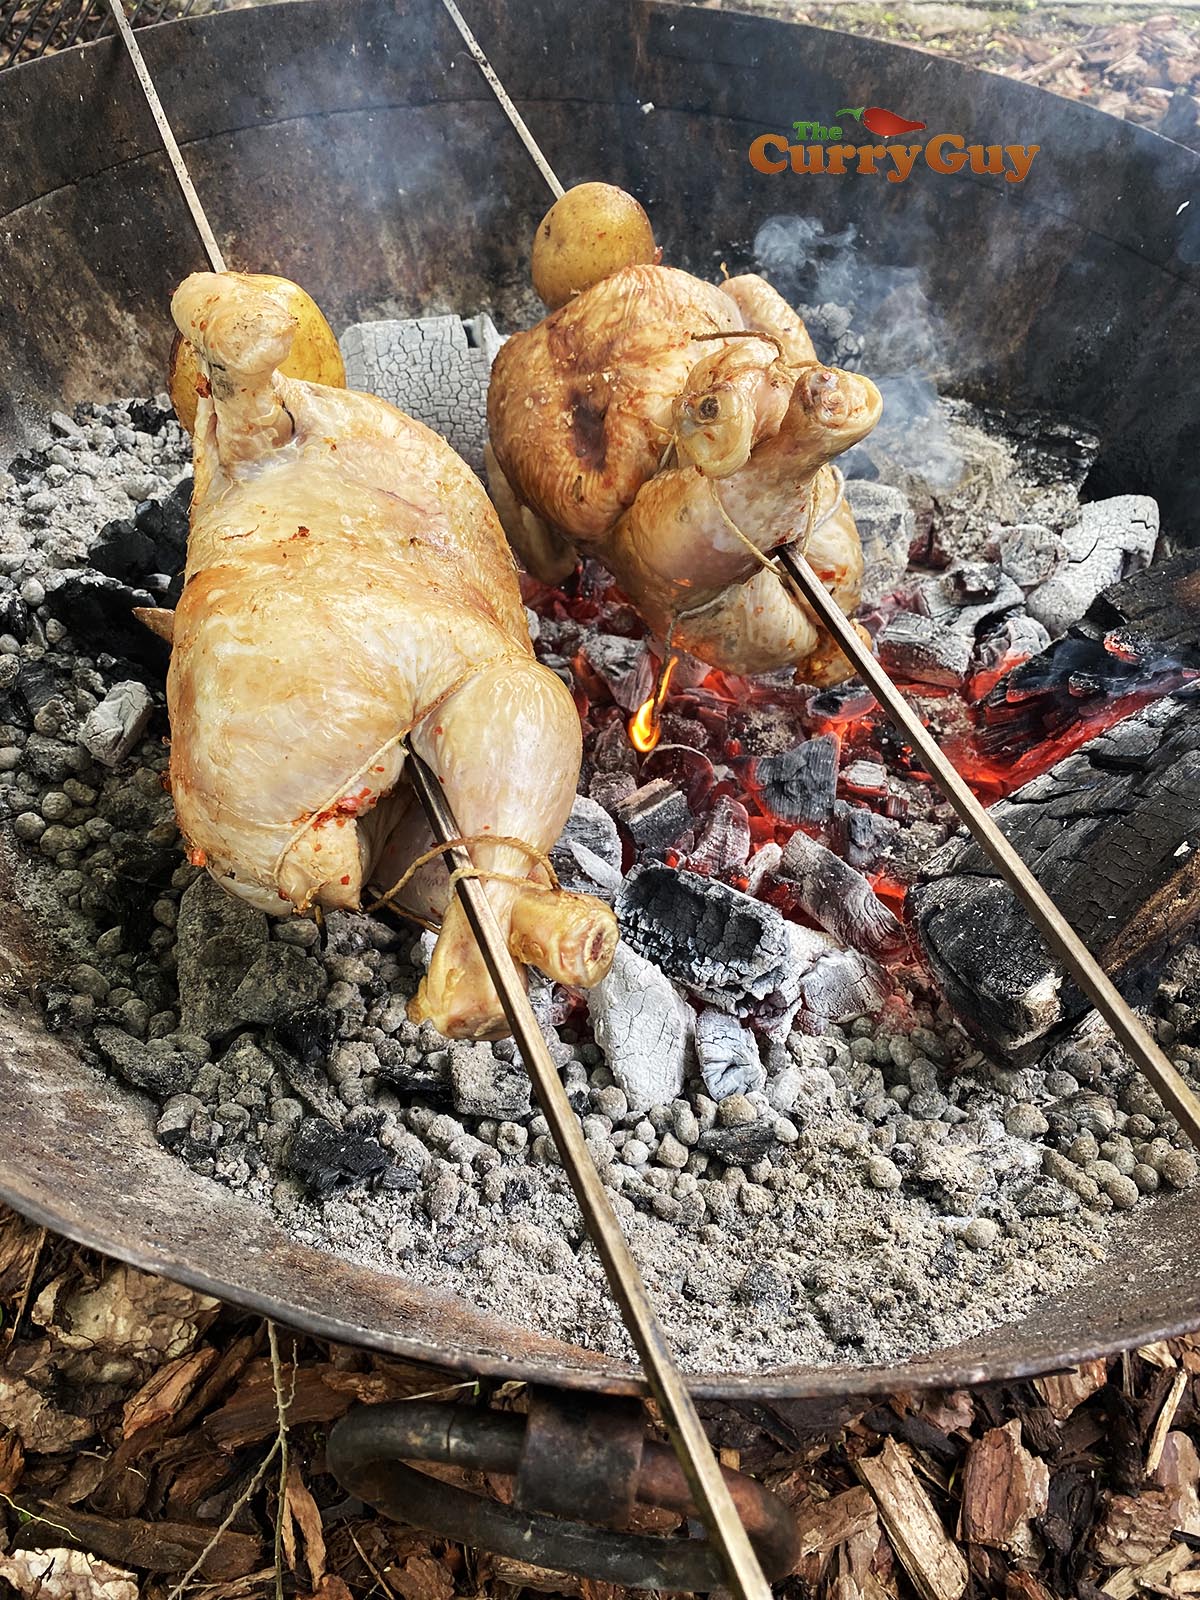 Charred chickens